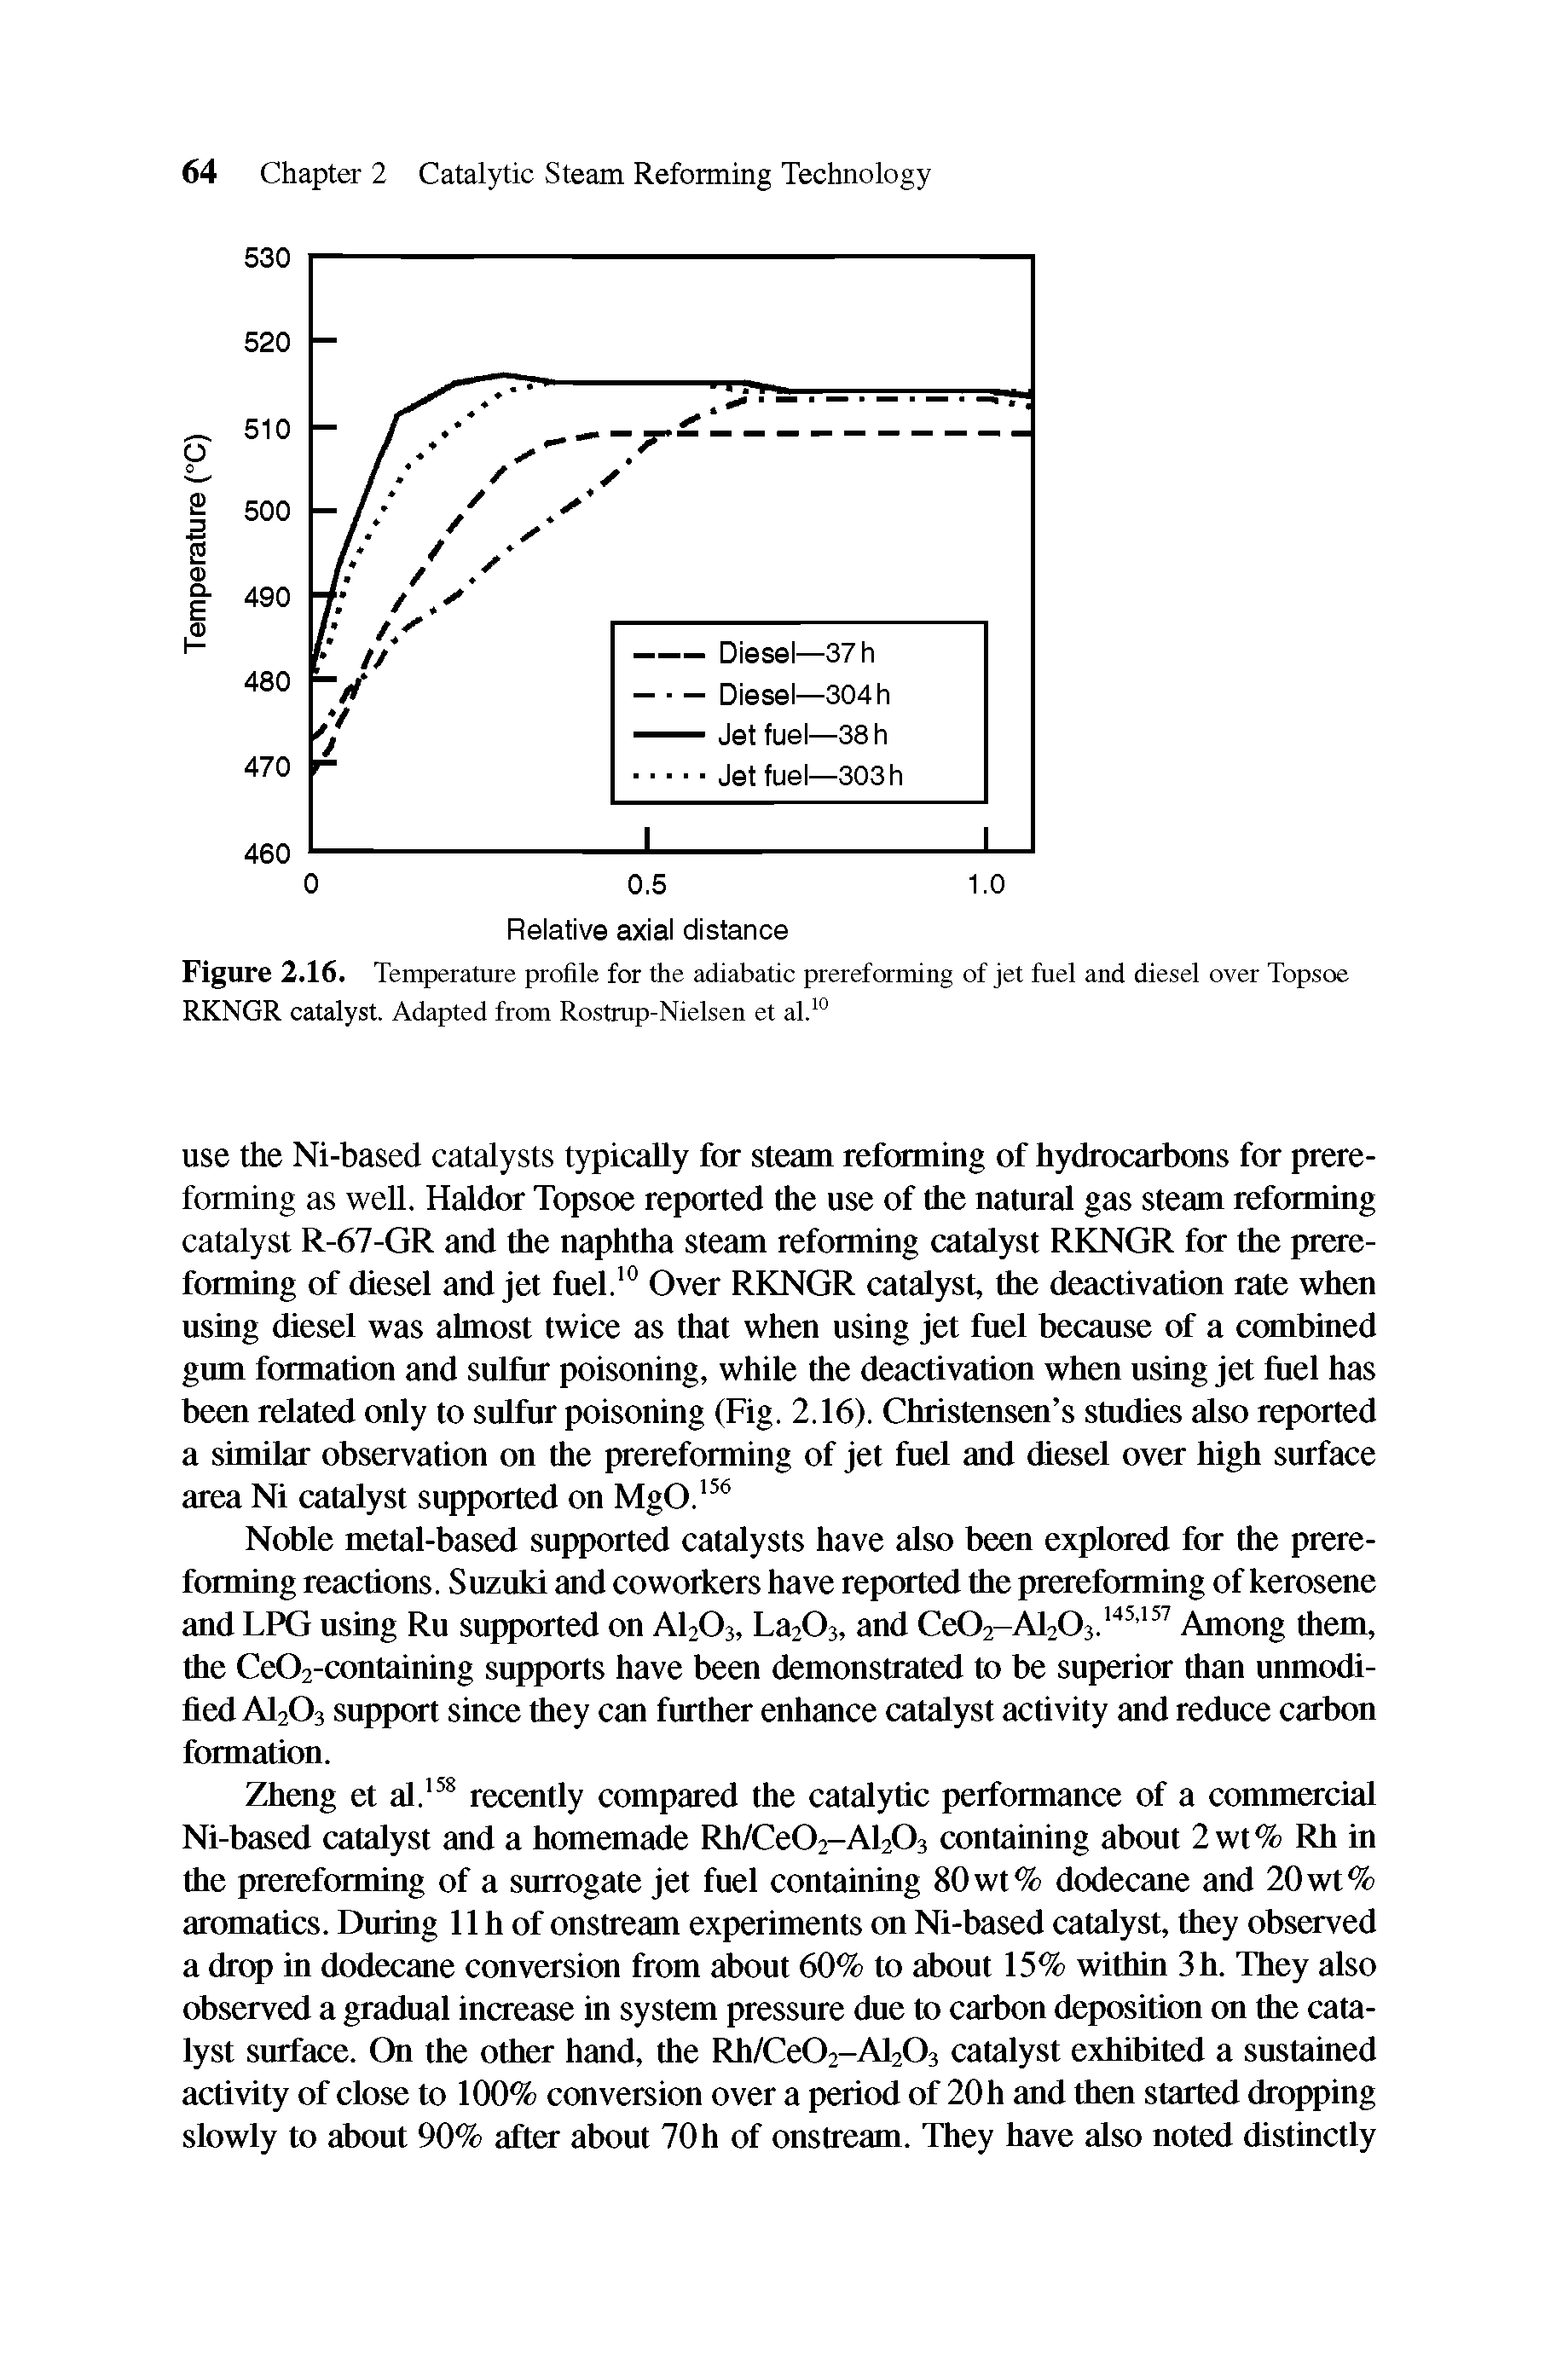 Figure 2.16. Temperature profile for the adiabatic prereforming of jet fuel and diesel over Topsoe RKNGR catalyst. Adapted from Rostrup-Nielsen et al.10...